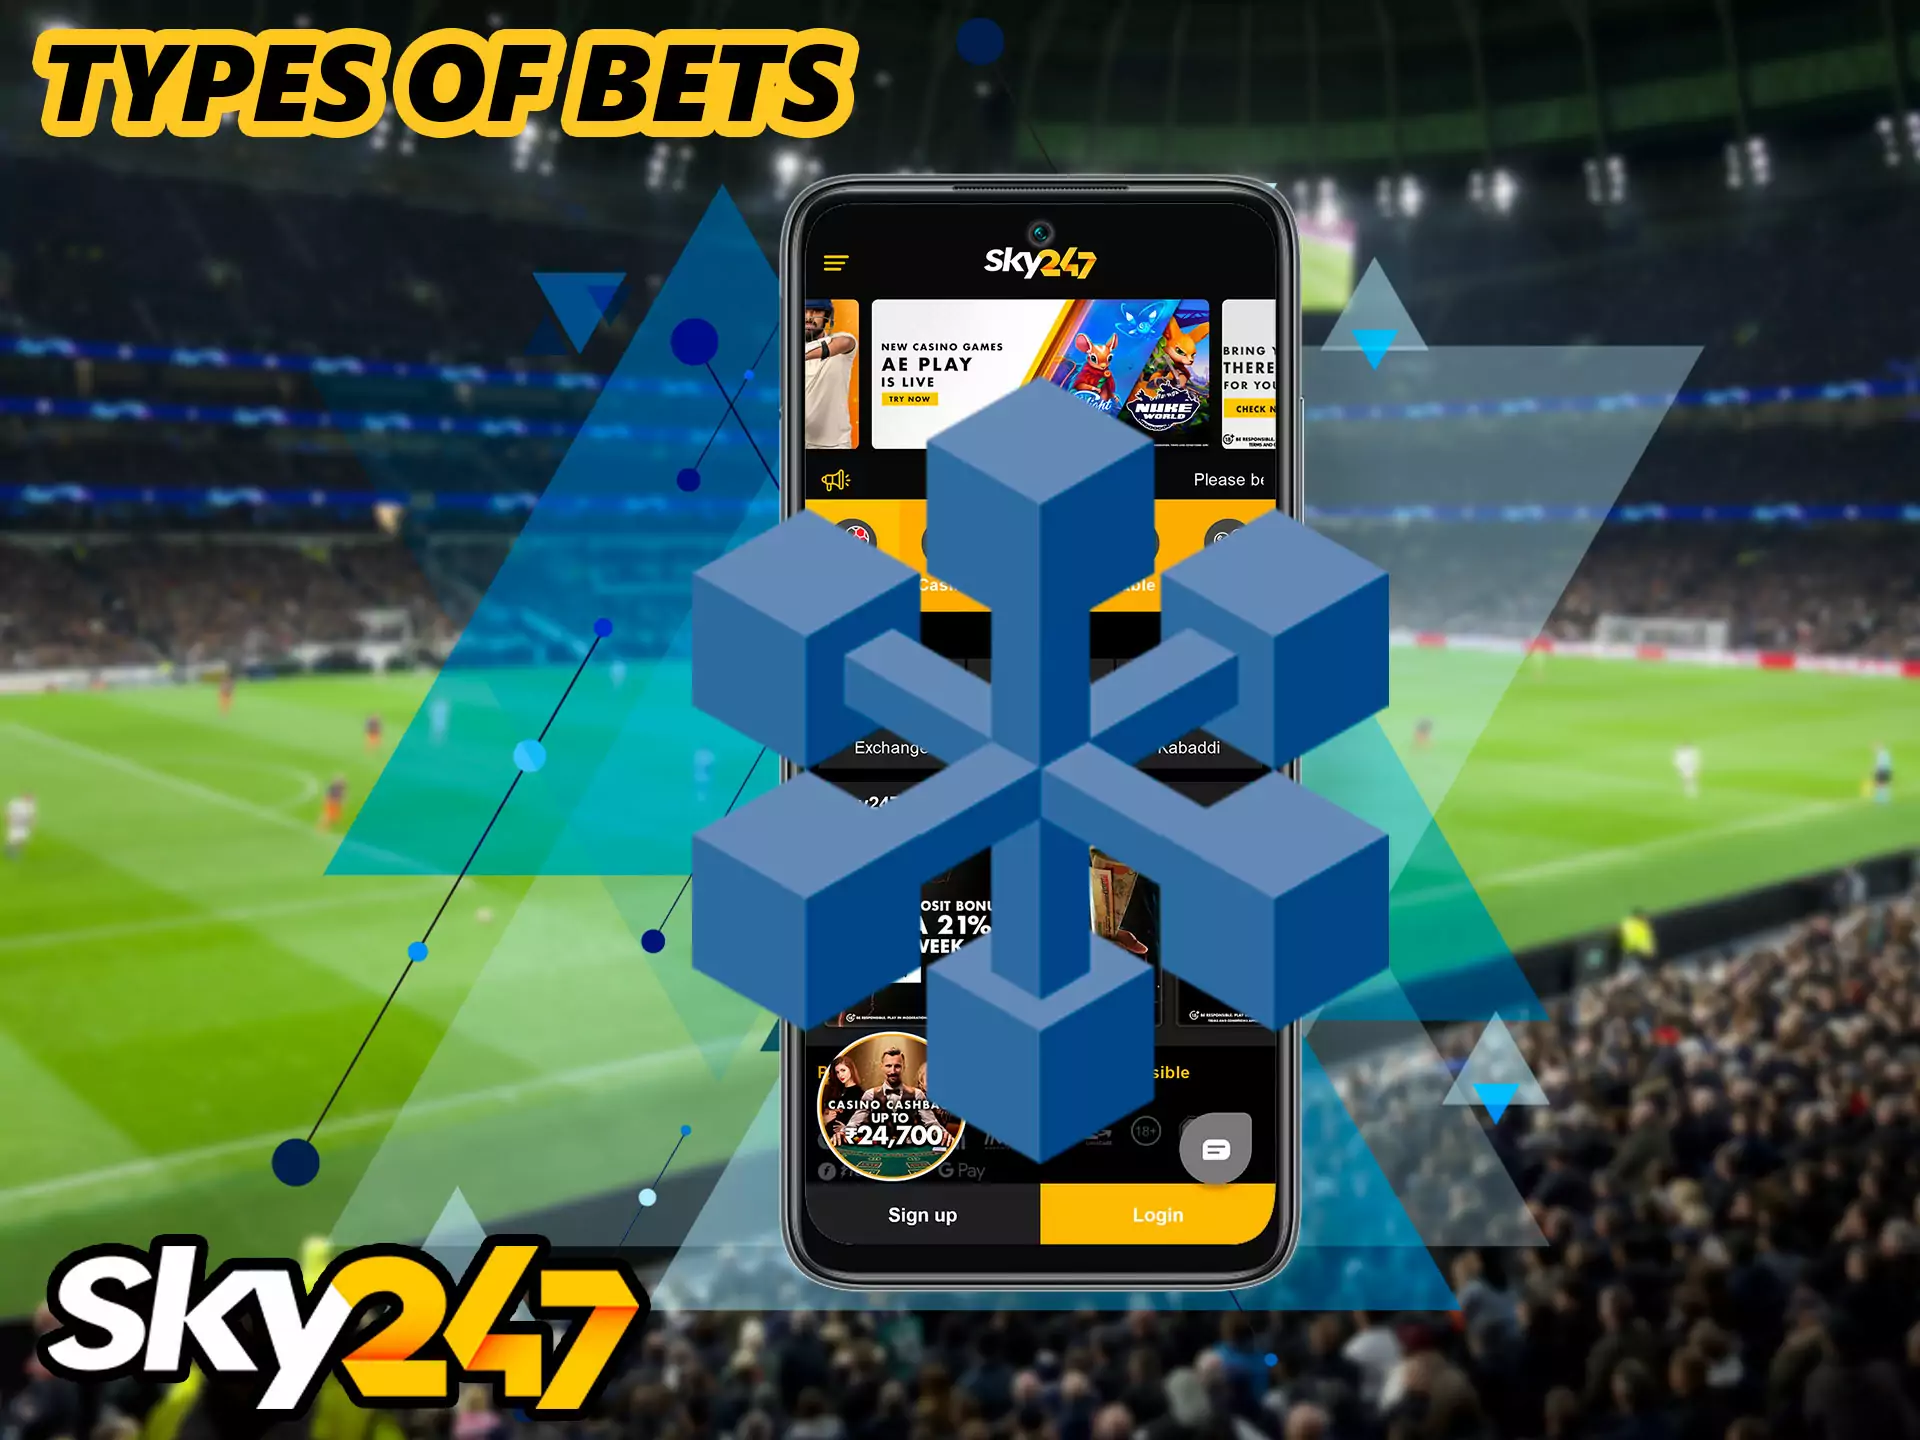 There is a huge number of bets that can be placed in the bookmaker application, we will review which bets are the most relevant.